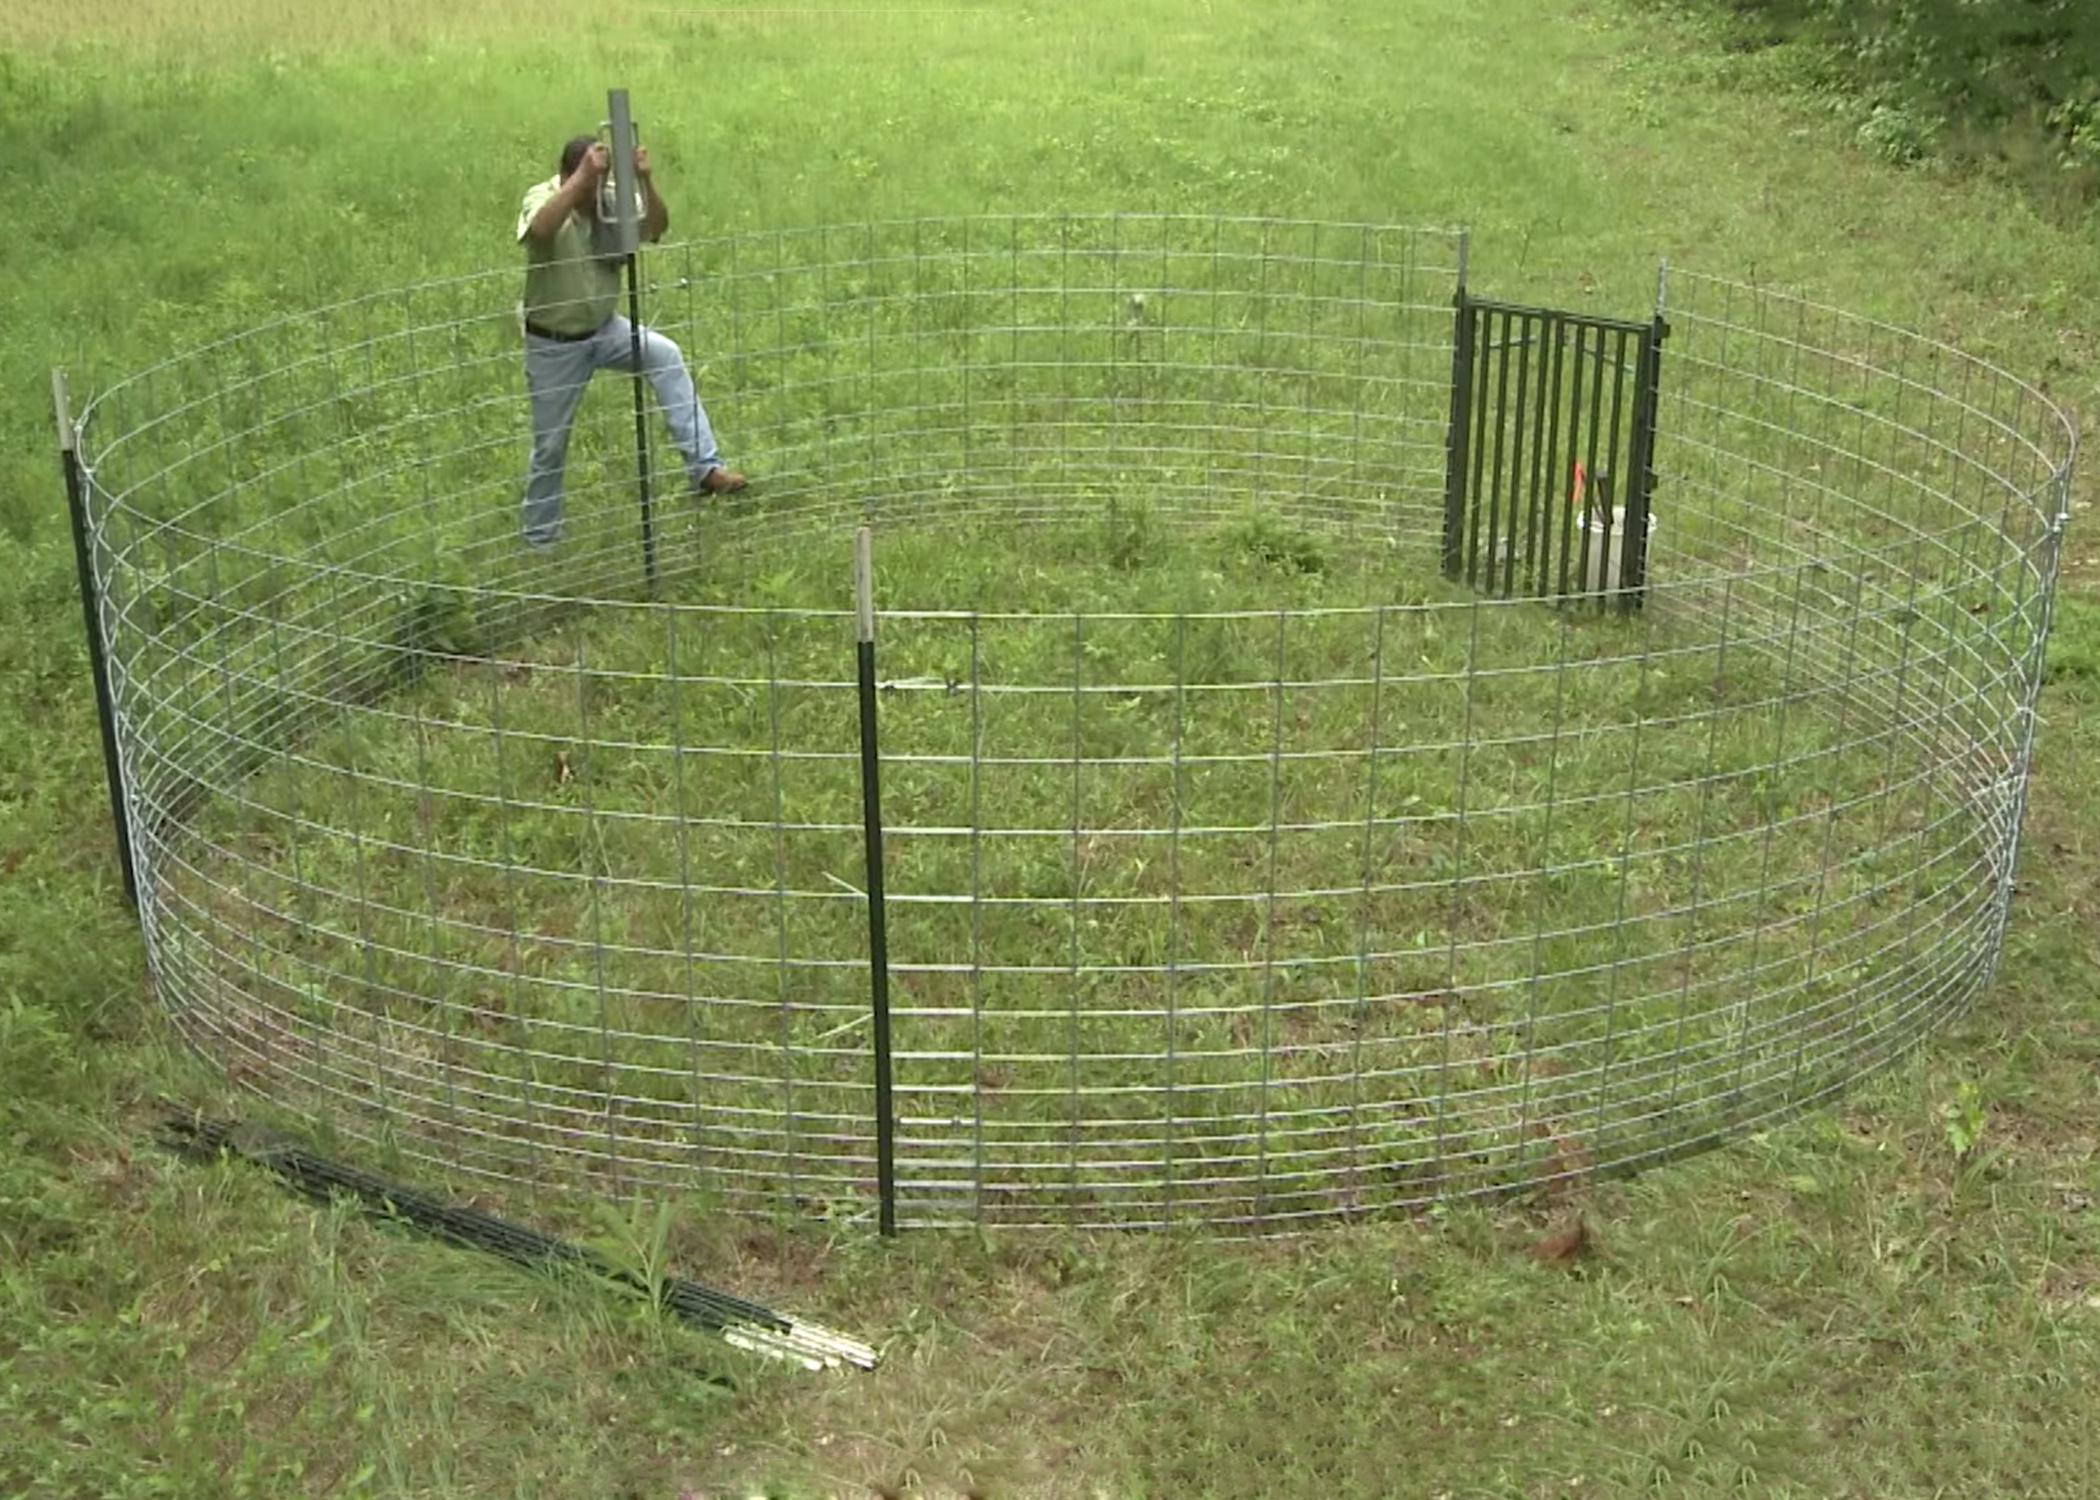 Bill Hamrick, a wildlife associate with the Mississippi State University Extension Service, constructs a corral trap, which wildlife biologists contend is the most effective method for reducing rapidly growing numbers of pigs. (Photo by MSU Ag Communications/Brian Utley)